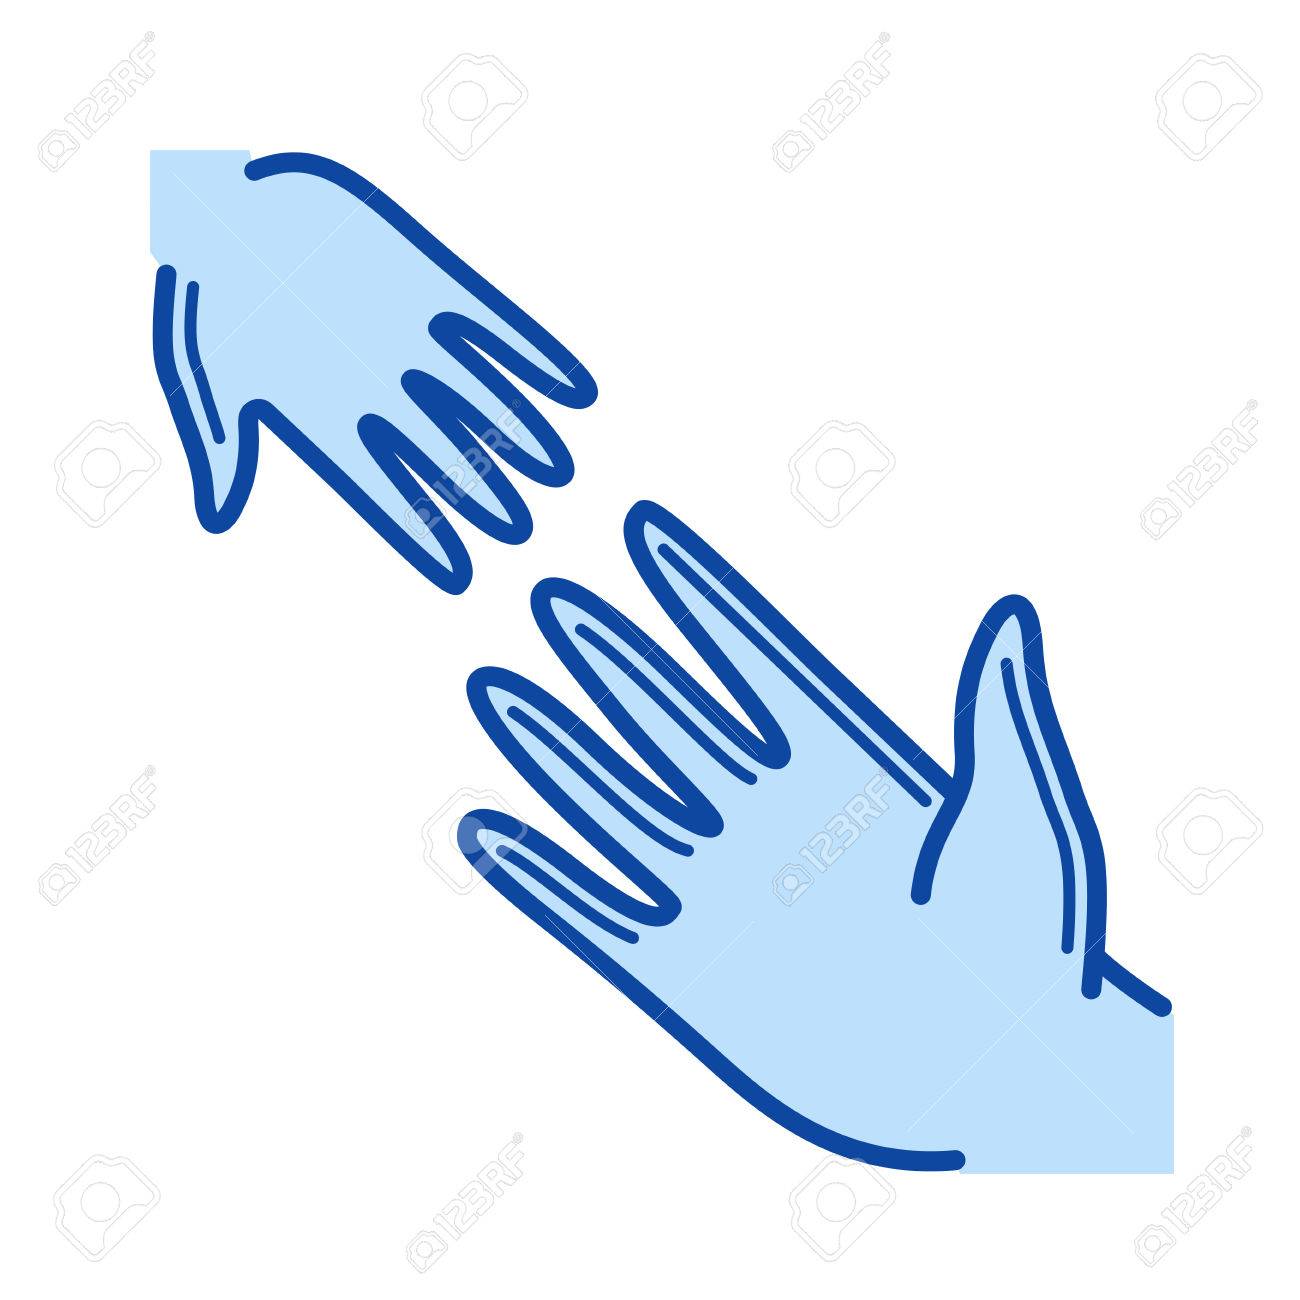 Helping Hand Vector Line Icon Isolated On White Background